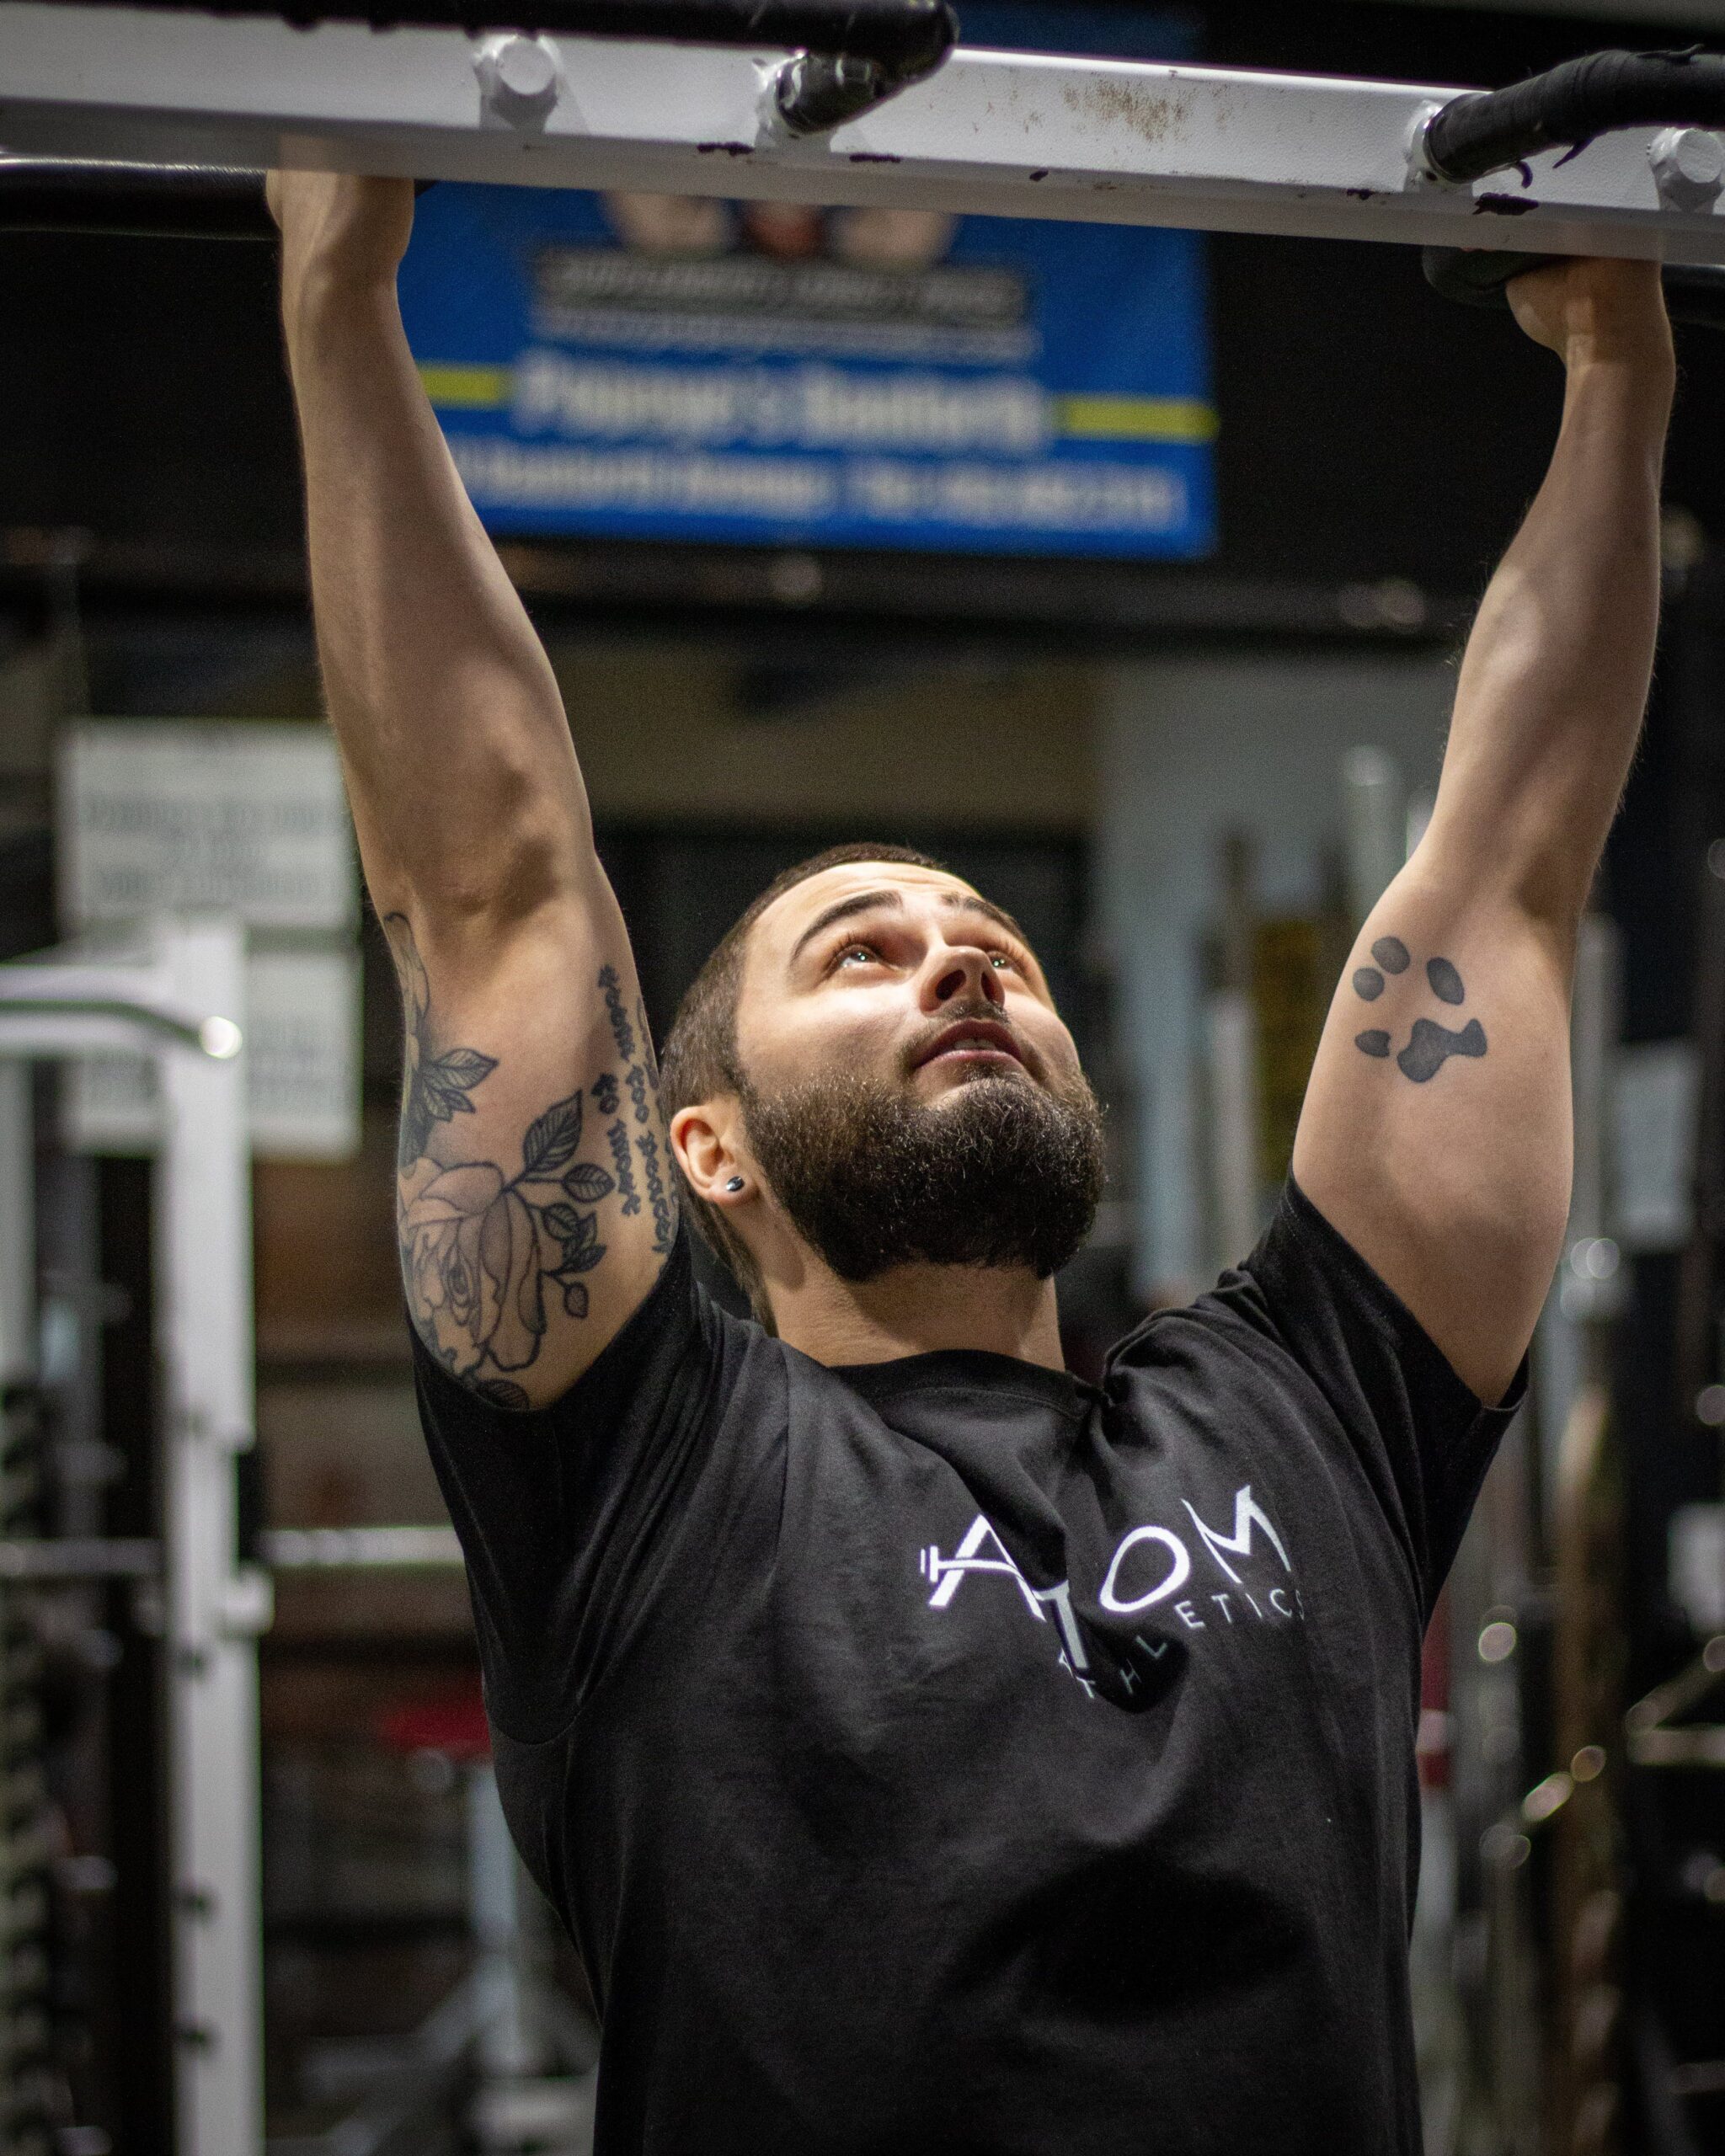 Alex is the founder of Atom Athletics. His Liberty Village personal training company has now grown to service all of downtown Toronto.